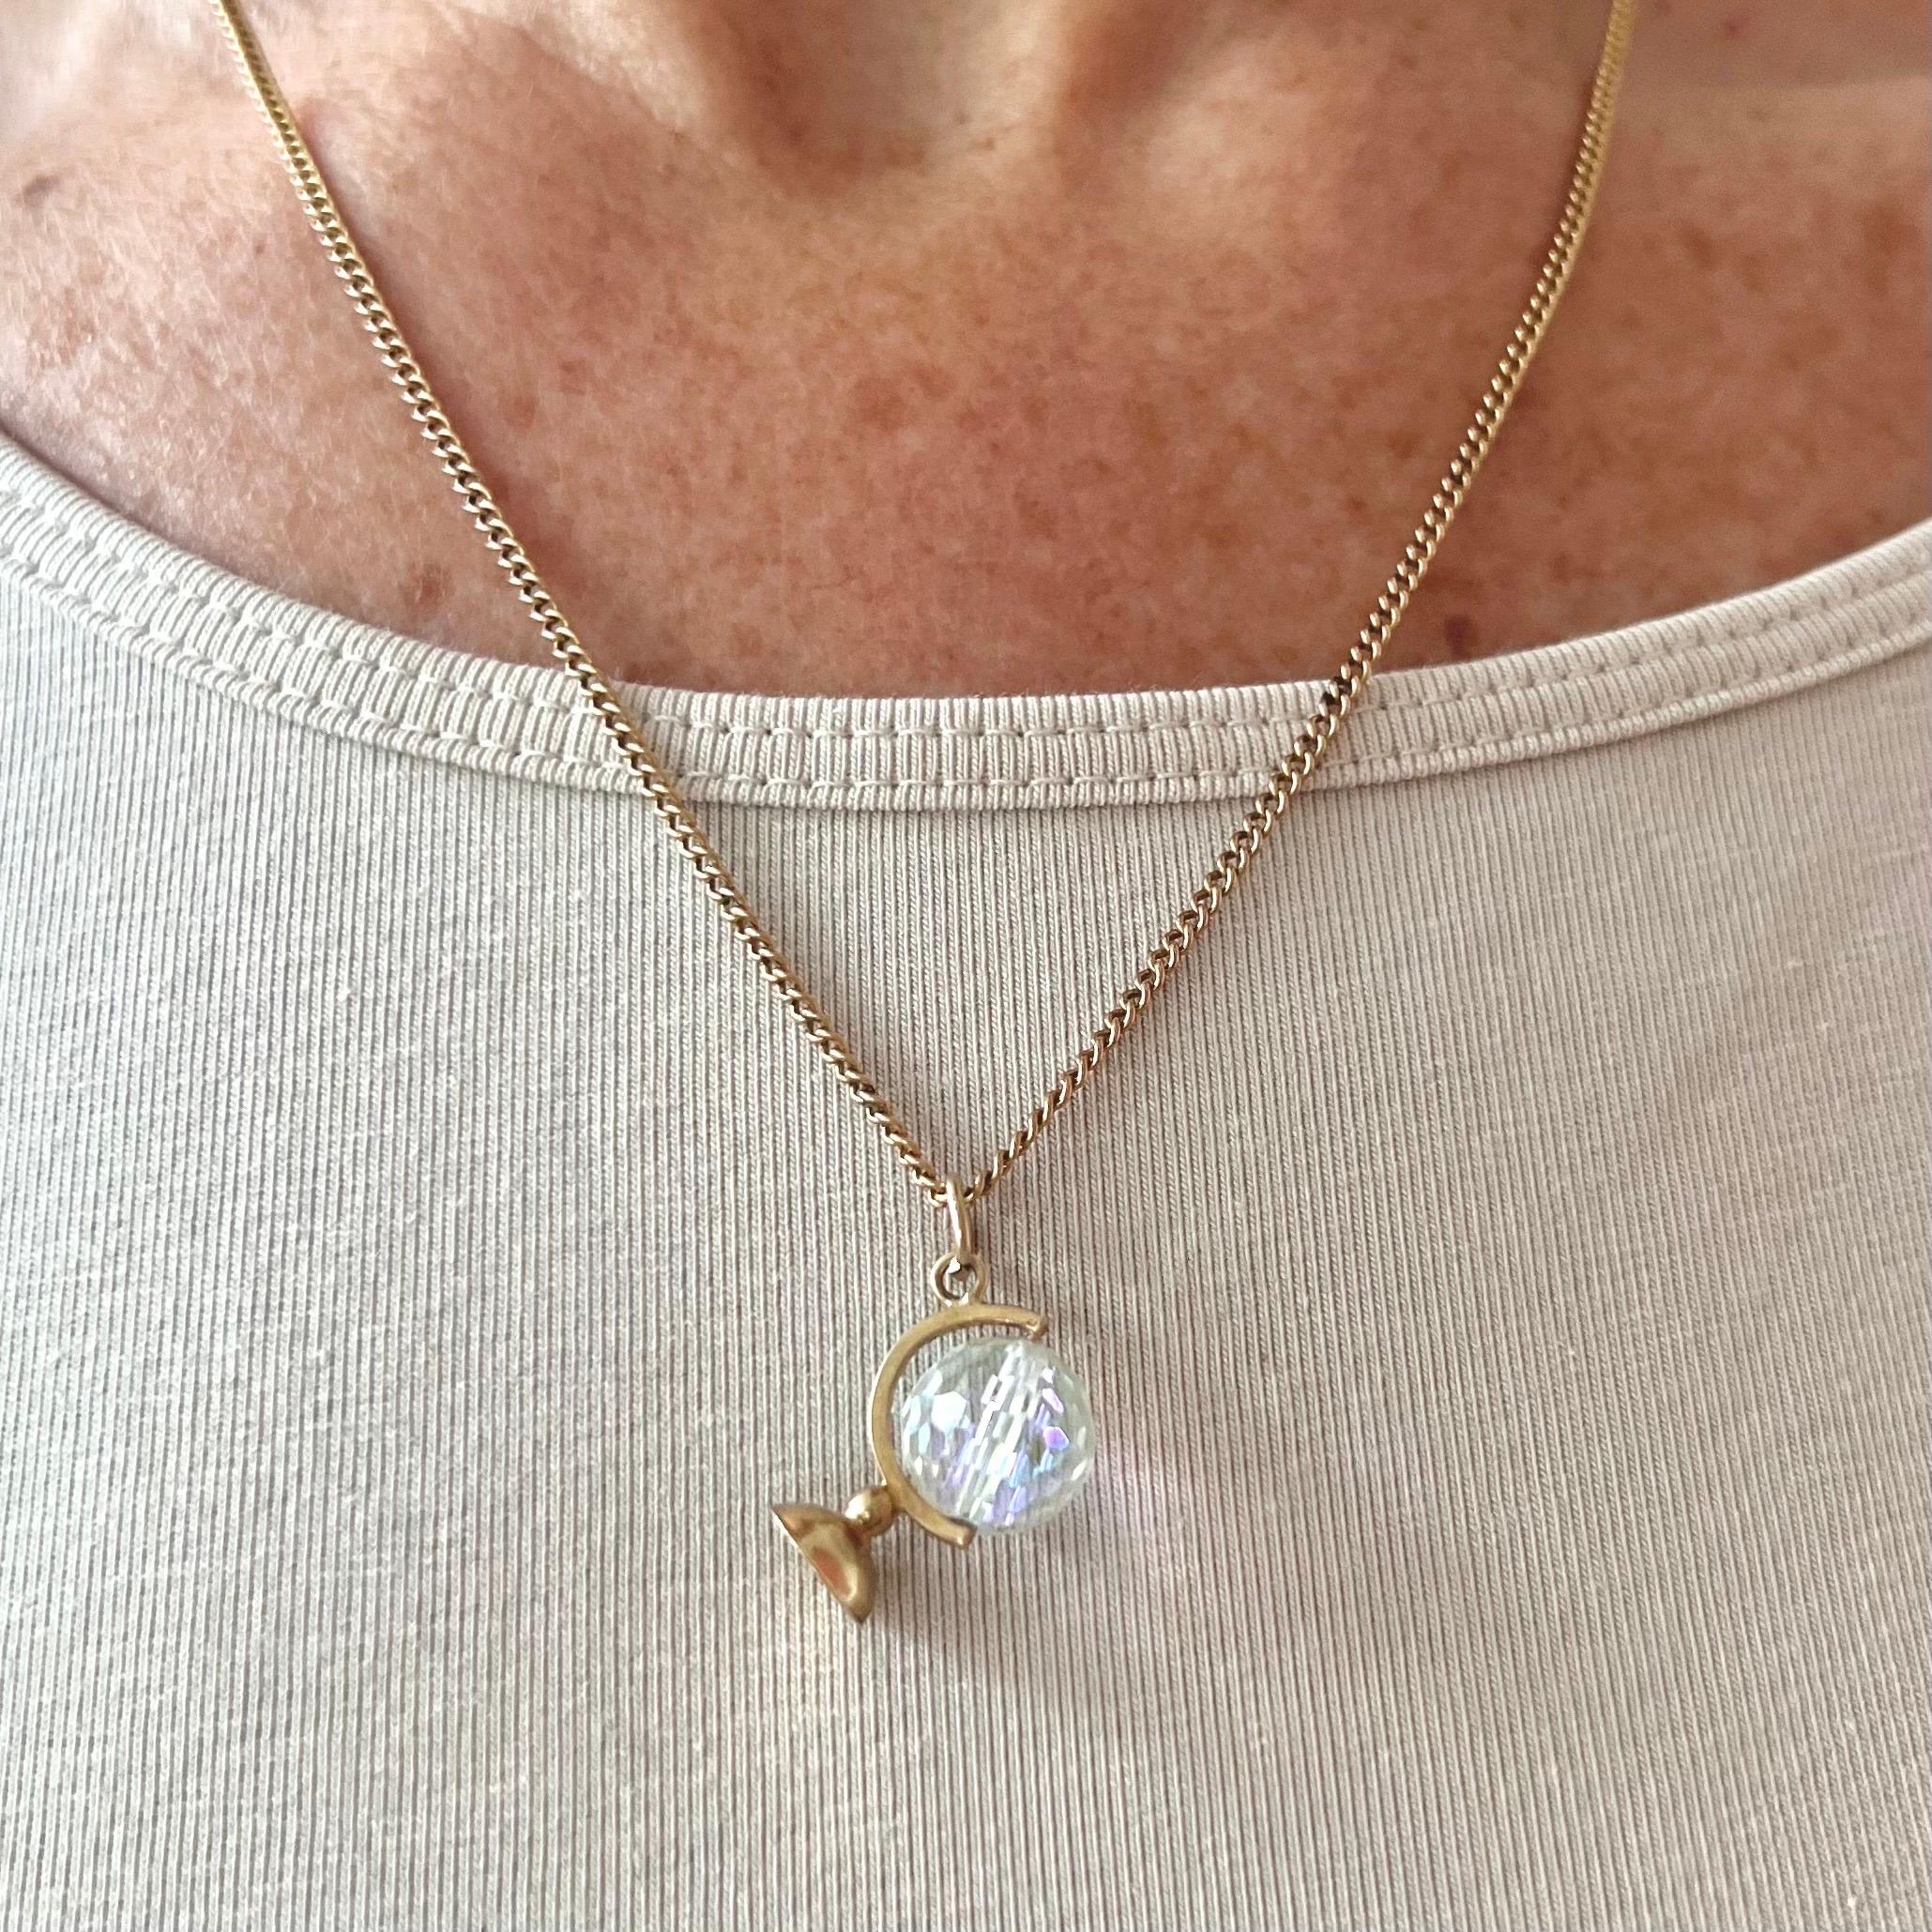 A vintage 9 karat yellow gold glass globe charm pendant. The charm is beautifully detailed with a spinning glass globe with a prism of light. 

A prism is a clear, triangular device made up of plastic or glass (or any transparent material). When